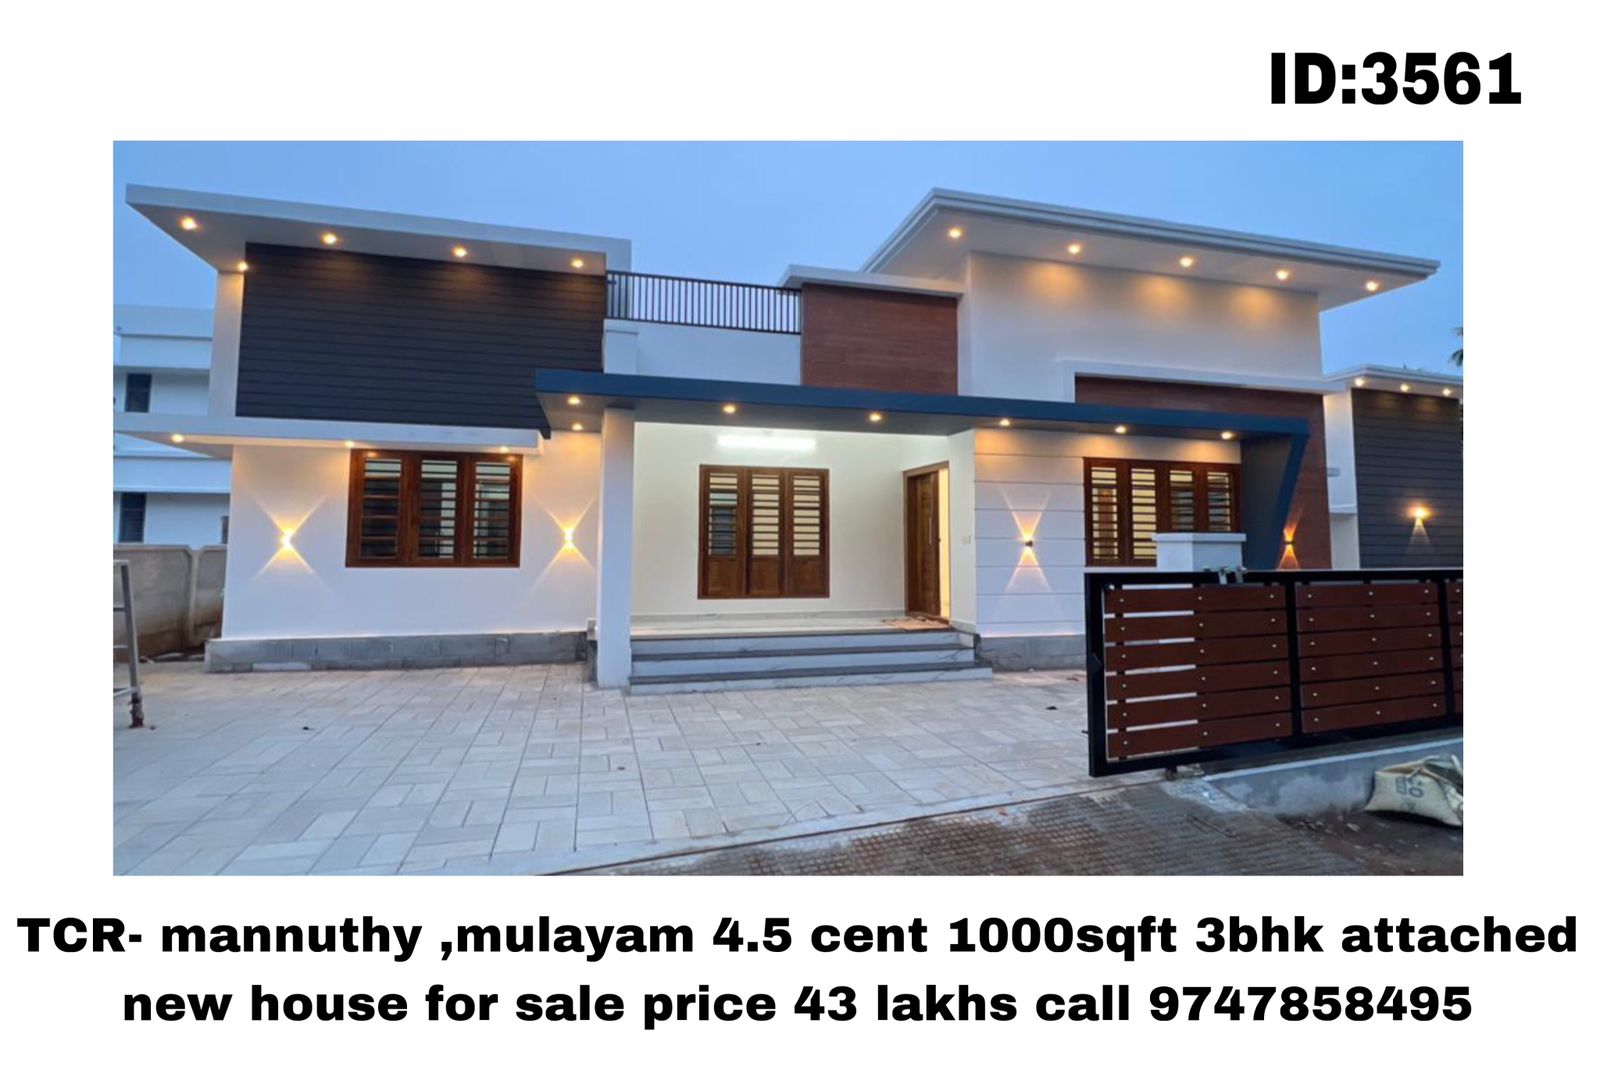 TCR- mannuthy ,mulayam 4.5 cent 1000sqft 3bhk attached new house for sale 